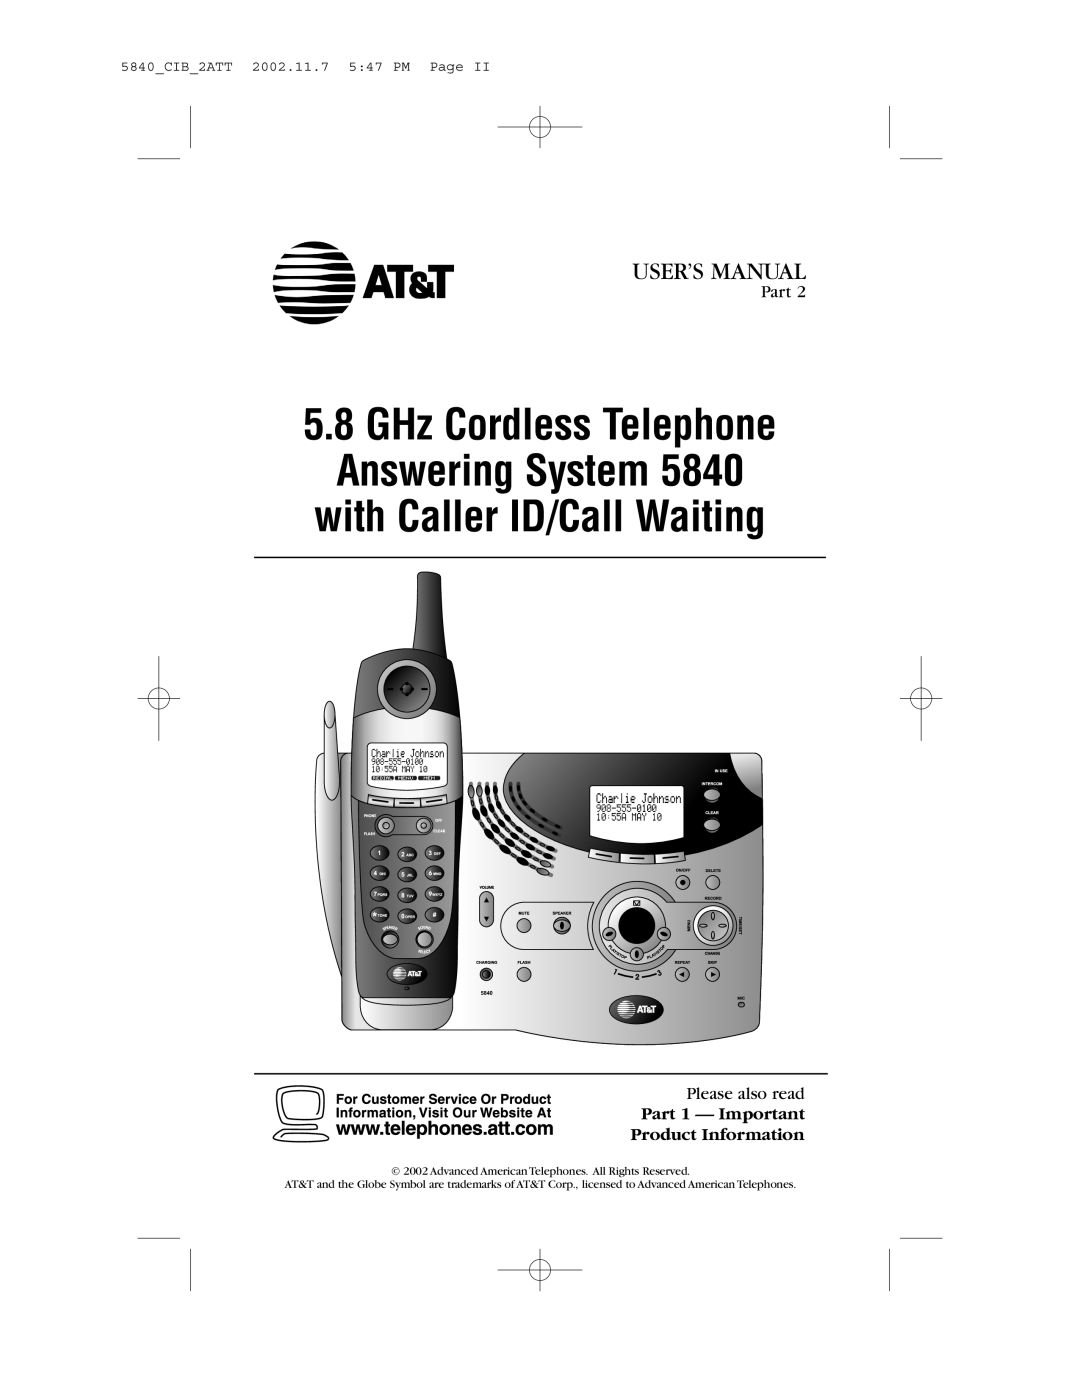 AT&T 5840 user manual User’S Manual, with Caller ID/Call Waiting, GHz Cordless Telephone Answering System 